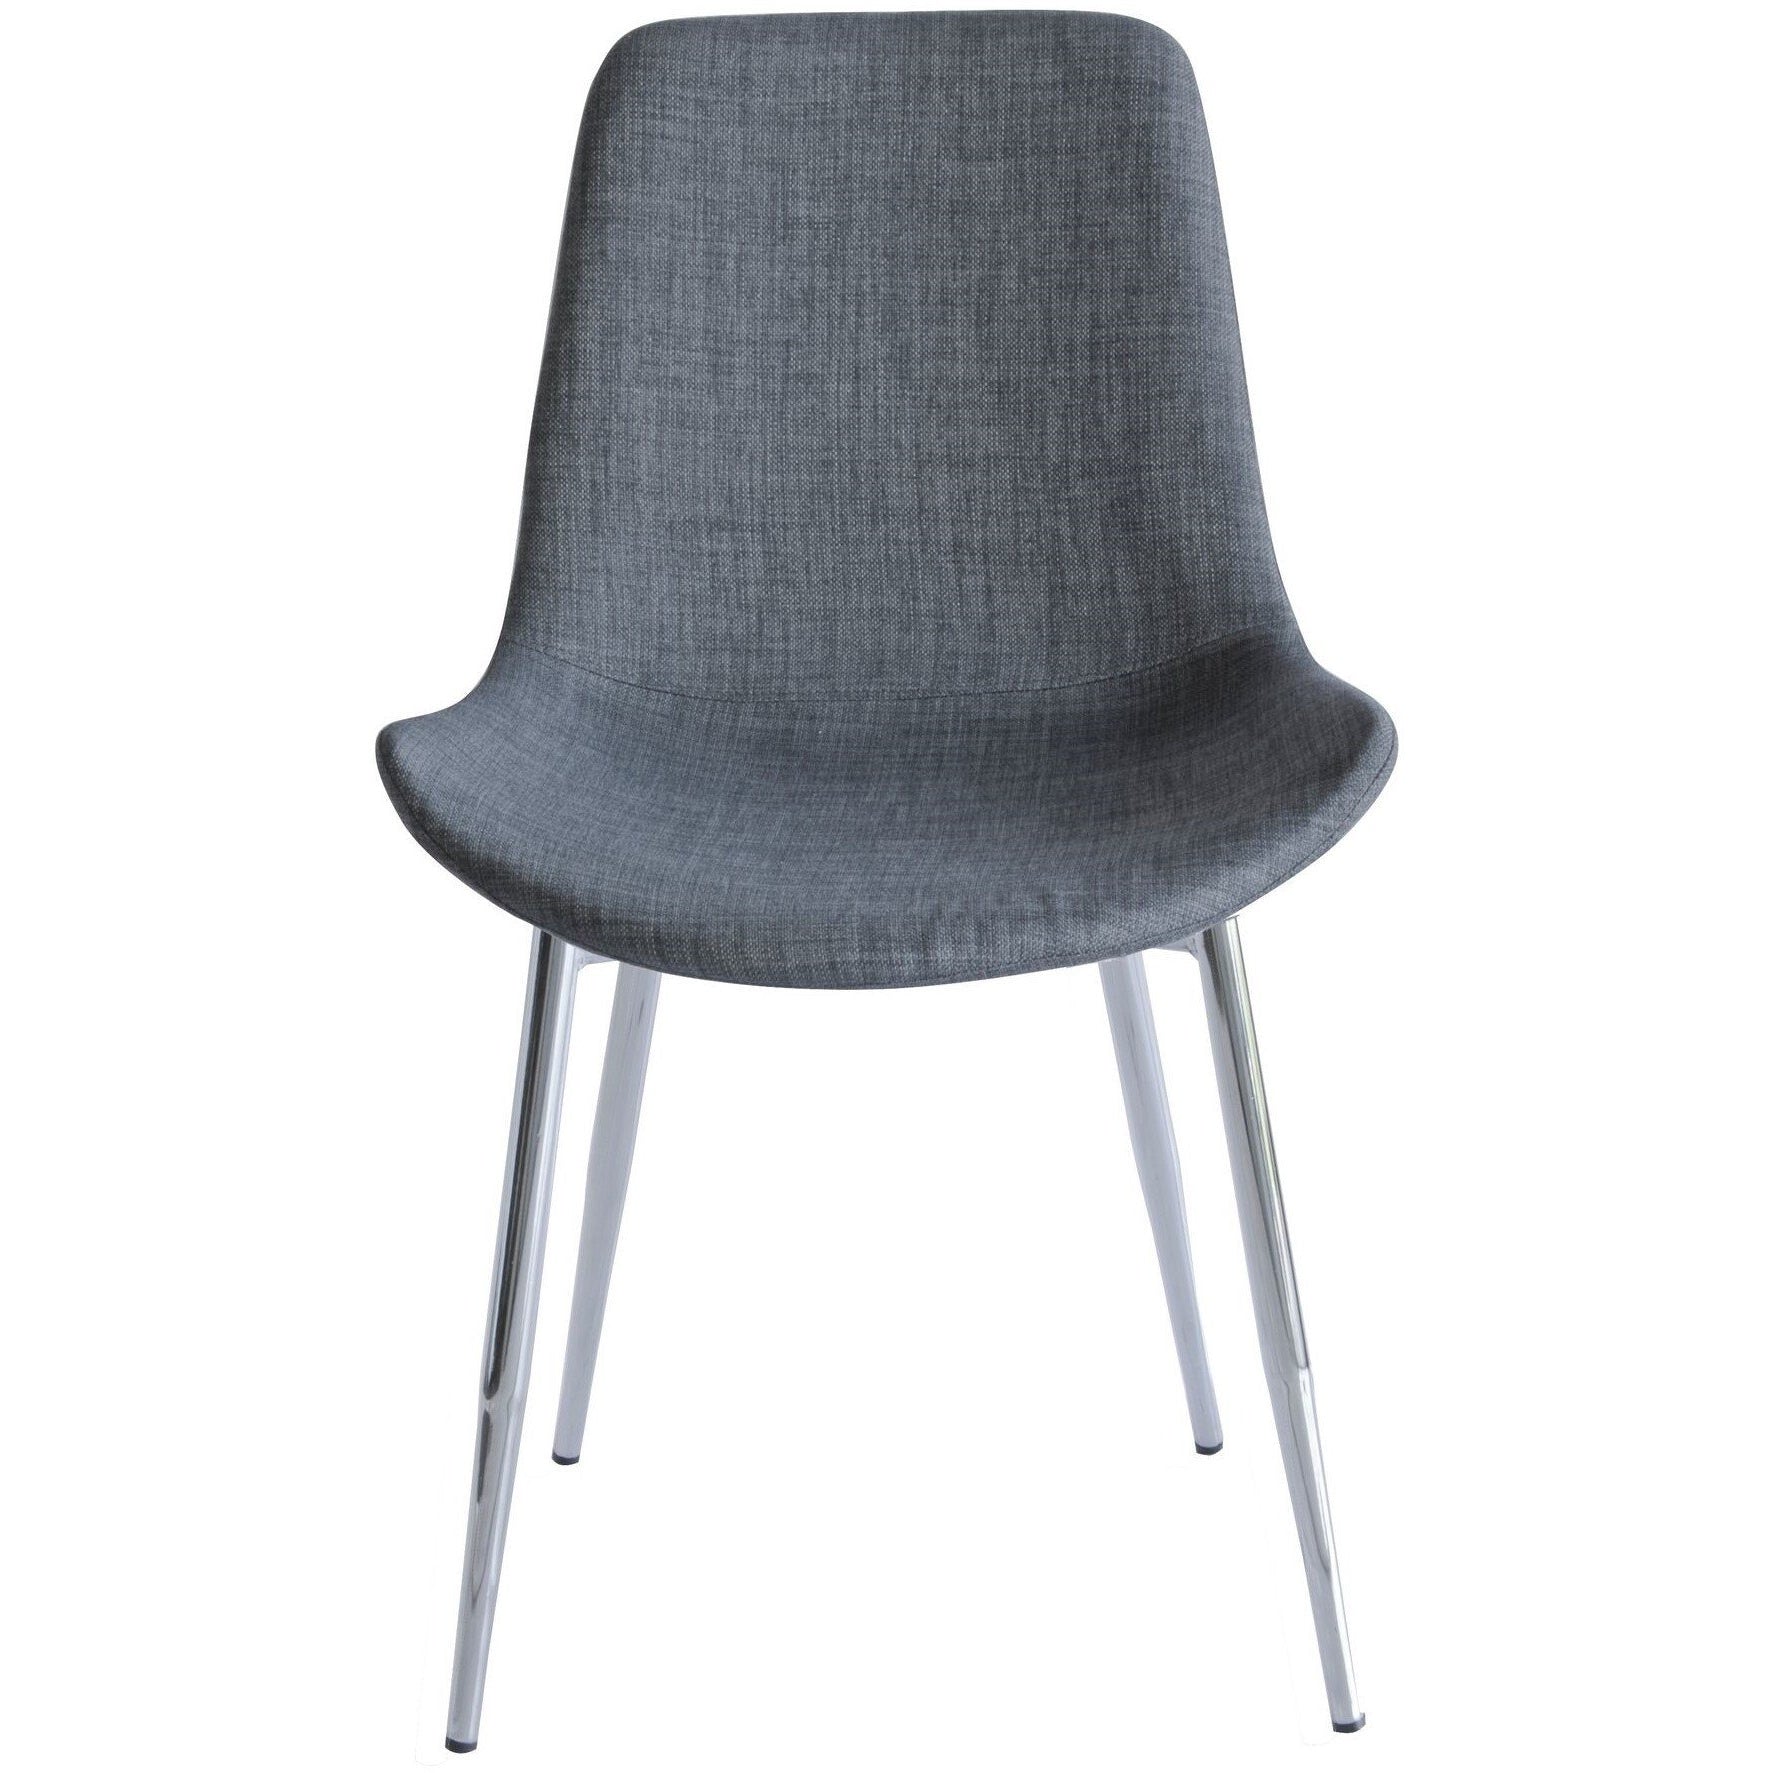 Grey And Chrome Dining Chairs : 8rzml3m2khft M : Black dining chairs